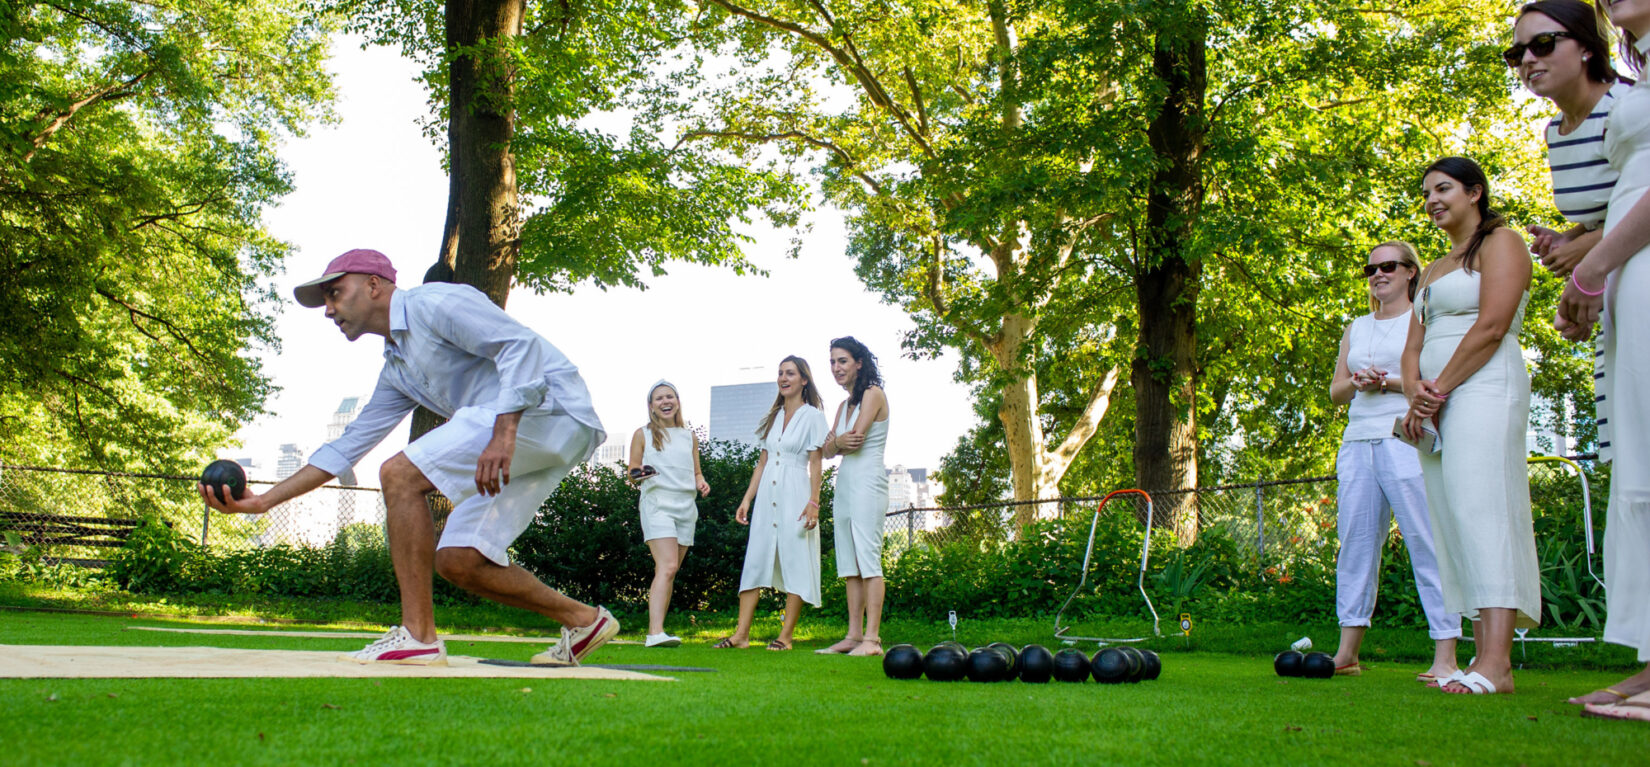 Cancelled: Lawn Bowling in Central Park